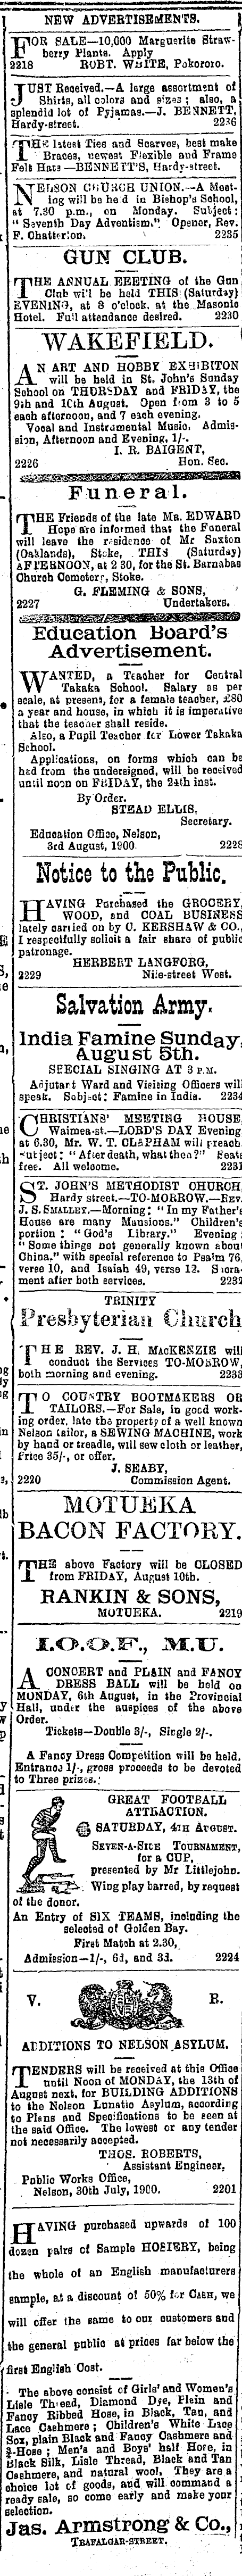 Papers Past Newspapers Colonist 4 August 1900 Page 2 Advertisements Column 2